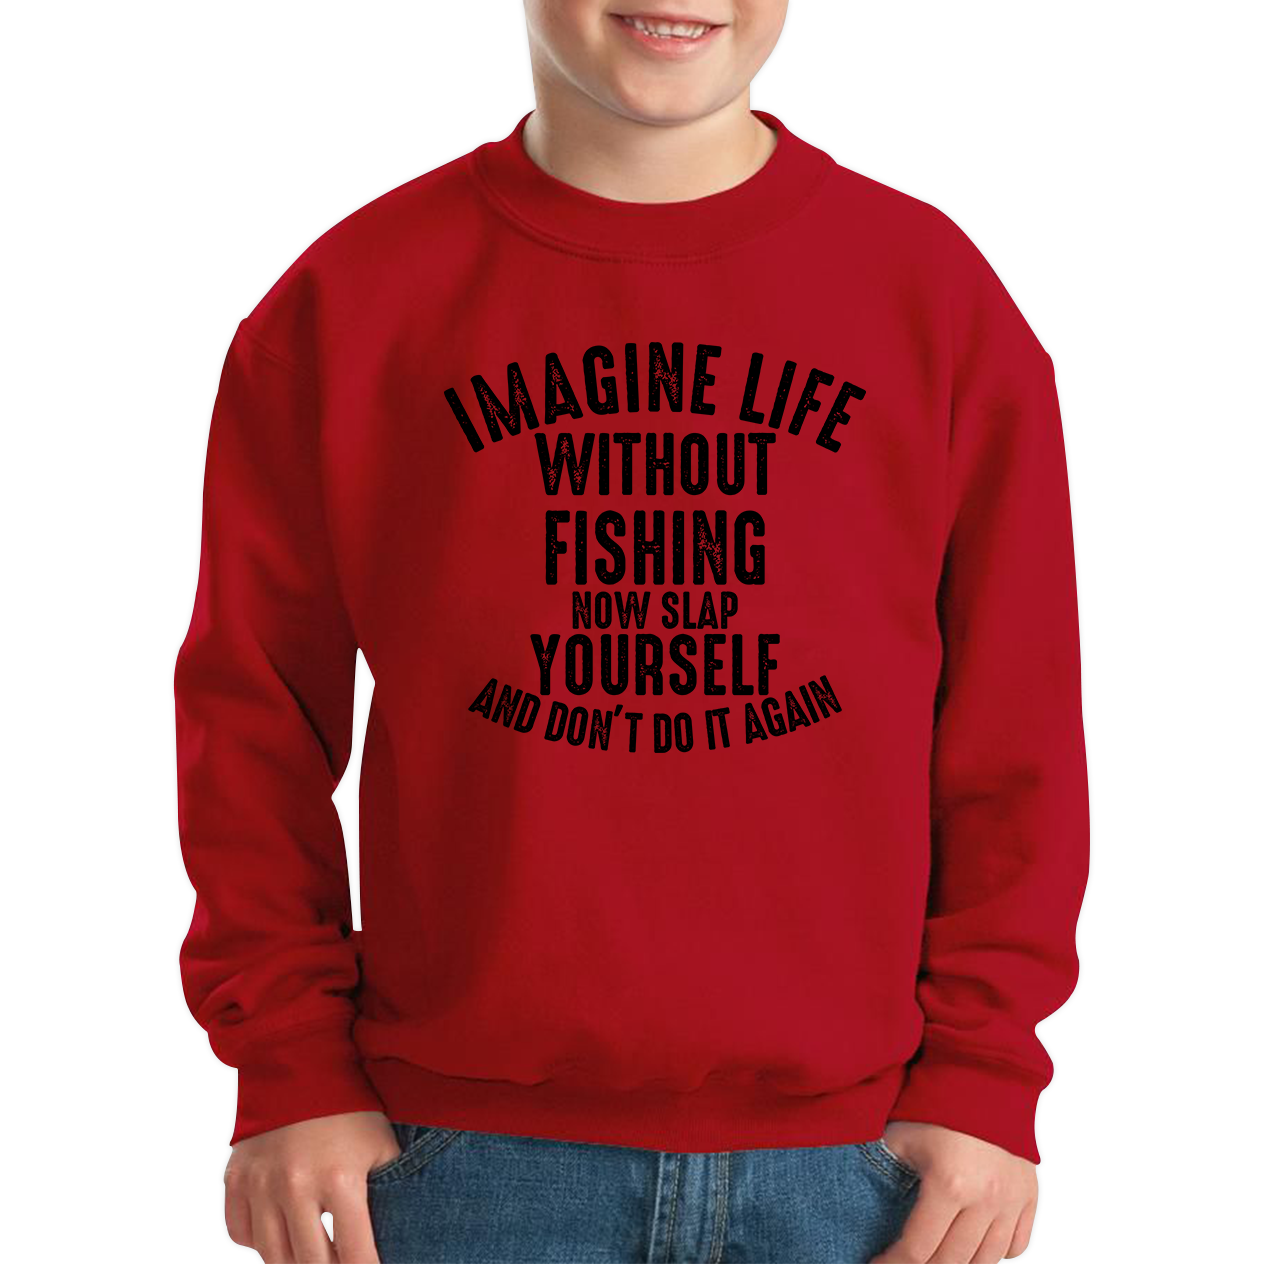 Imagine Life Without Fishing Now Slap Yourself And Don't Do It Again Jumper Fisherman Fishing Adventure Hobby Funny Kids Sweatshirt